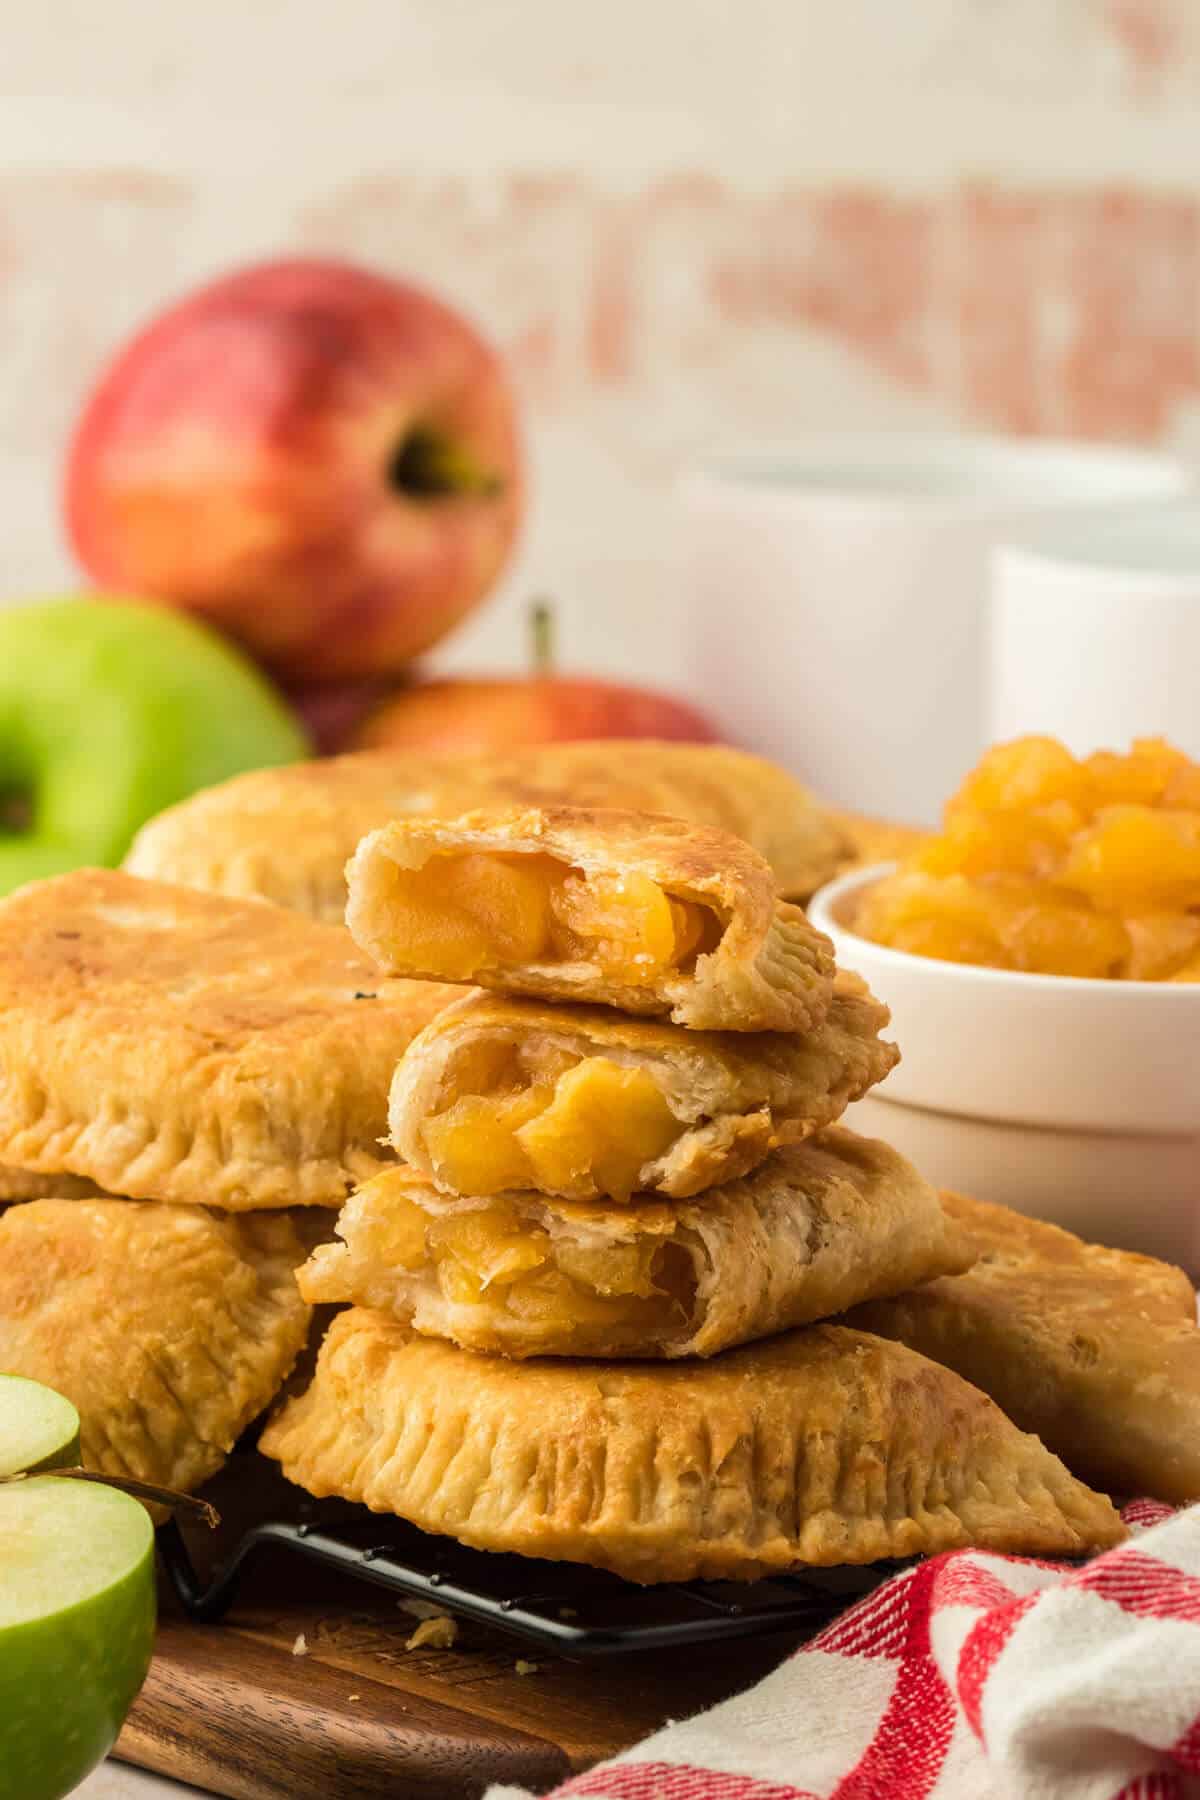 A stack of fried apple pies.